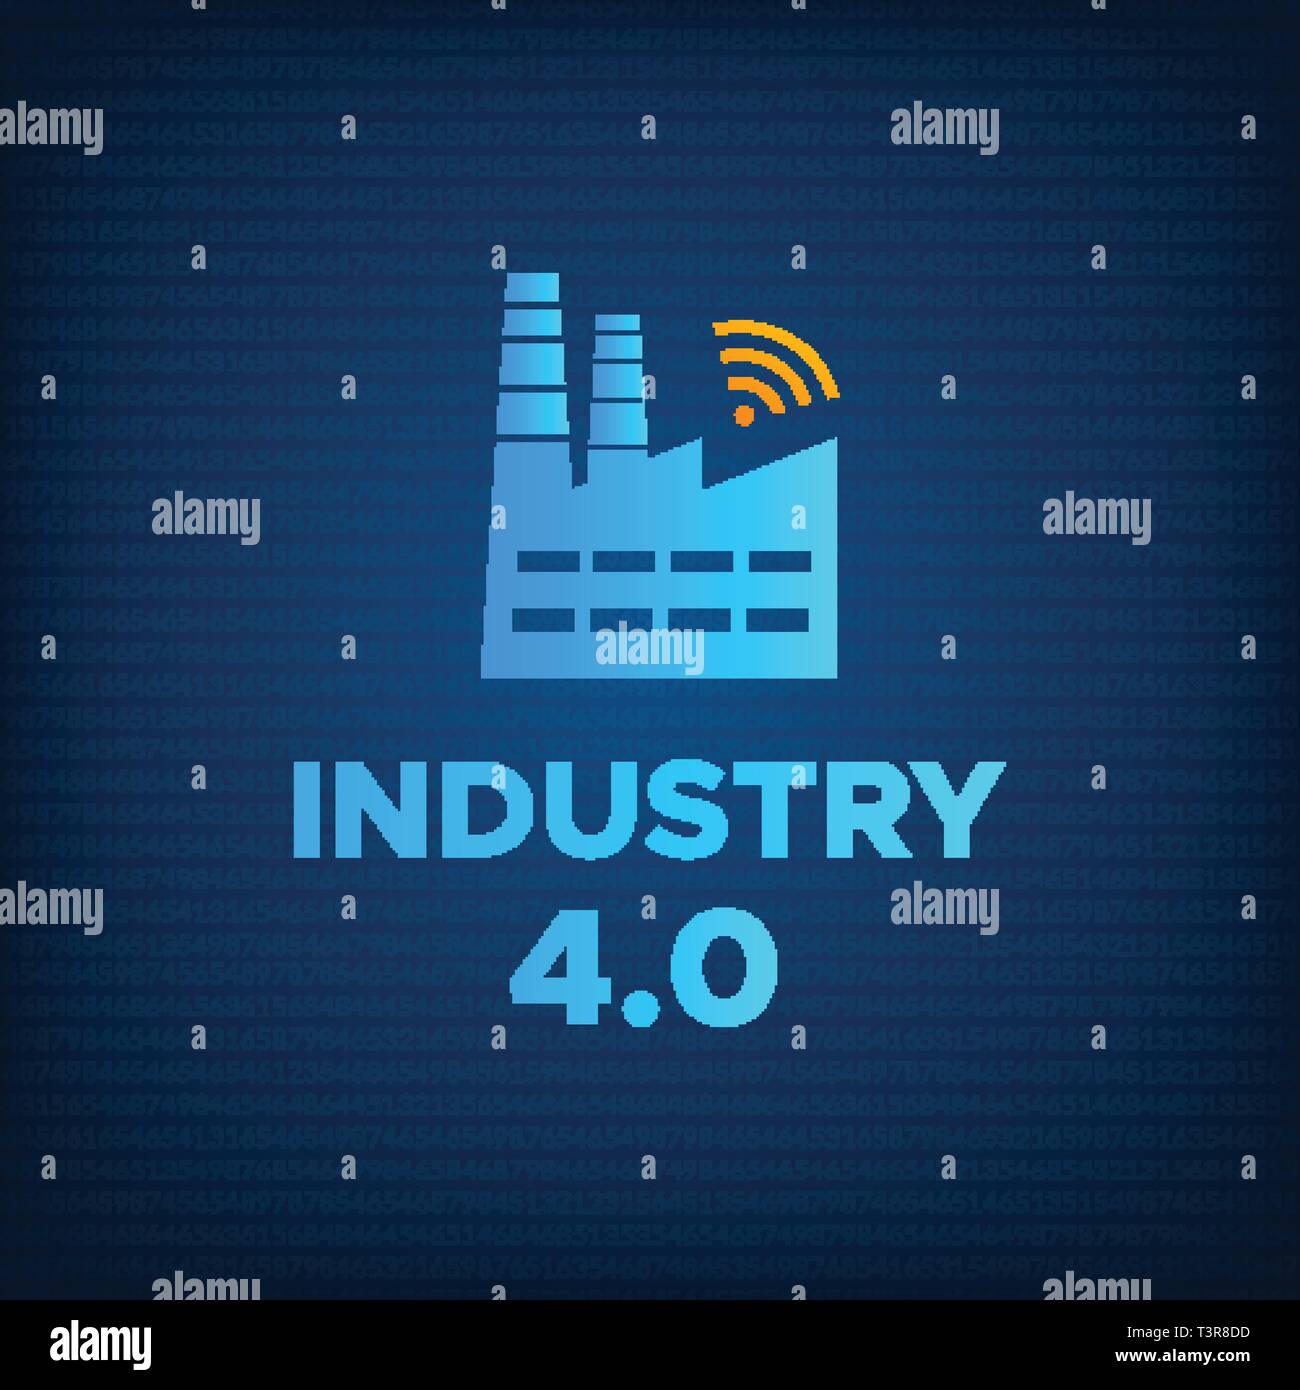 Manufacturing industry 4.0 revolution concept vector illustration. Blue factory icon with wireless symbol and sign INDUSTRY 4.0 Smart technology and technology background revolution business concept. Stock Vector